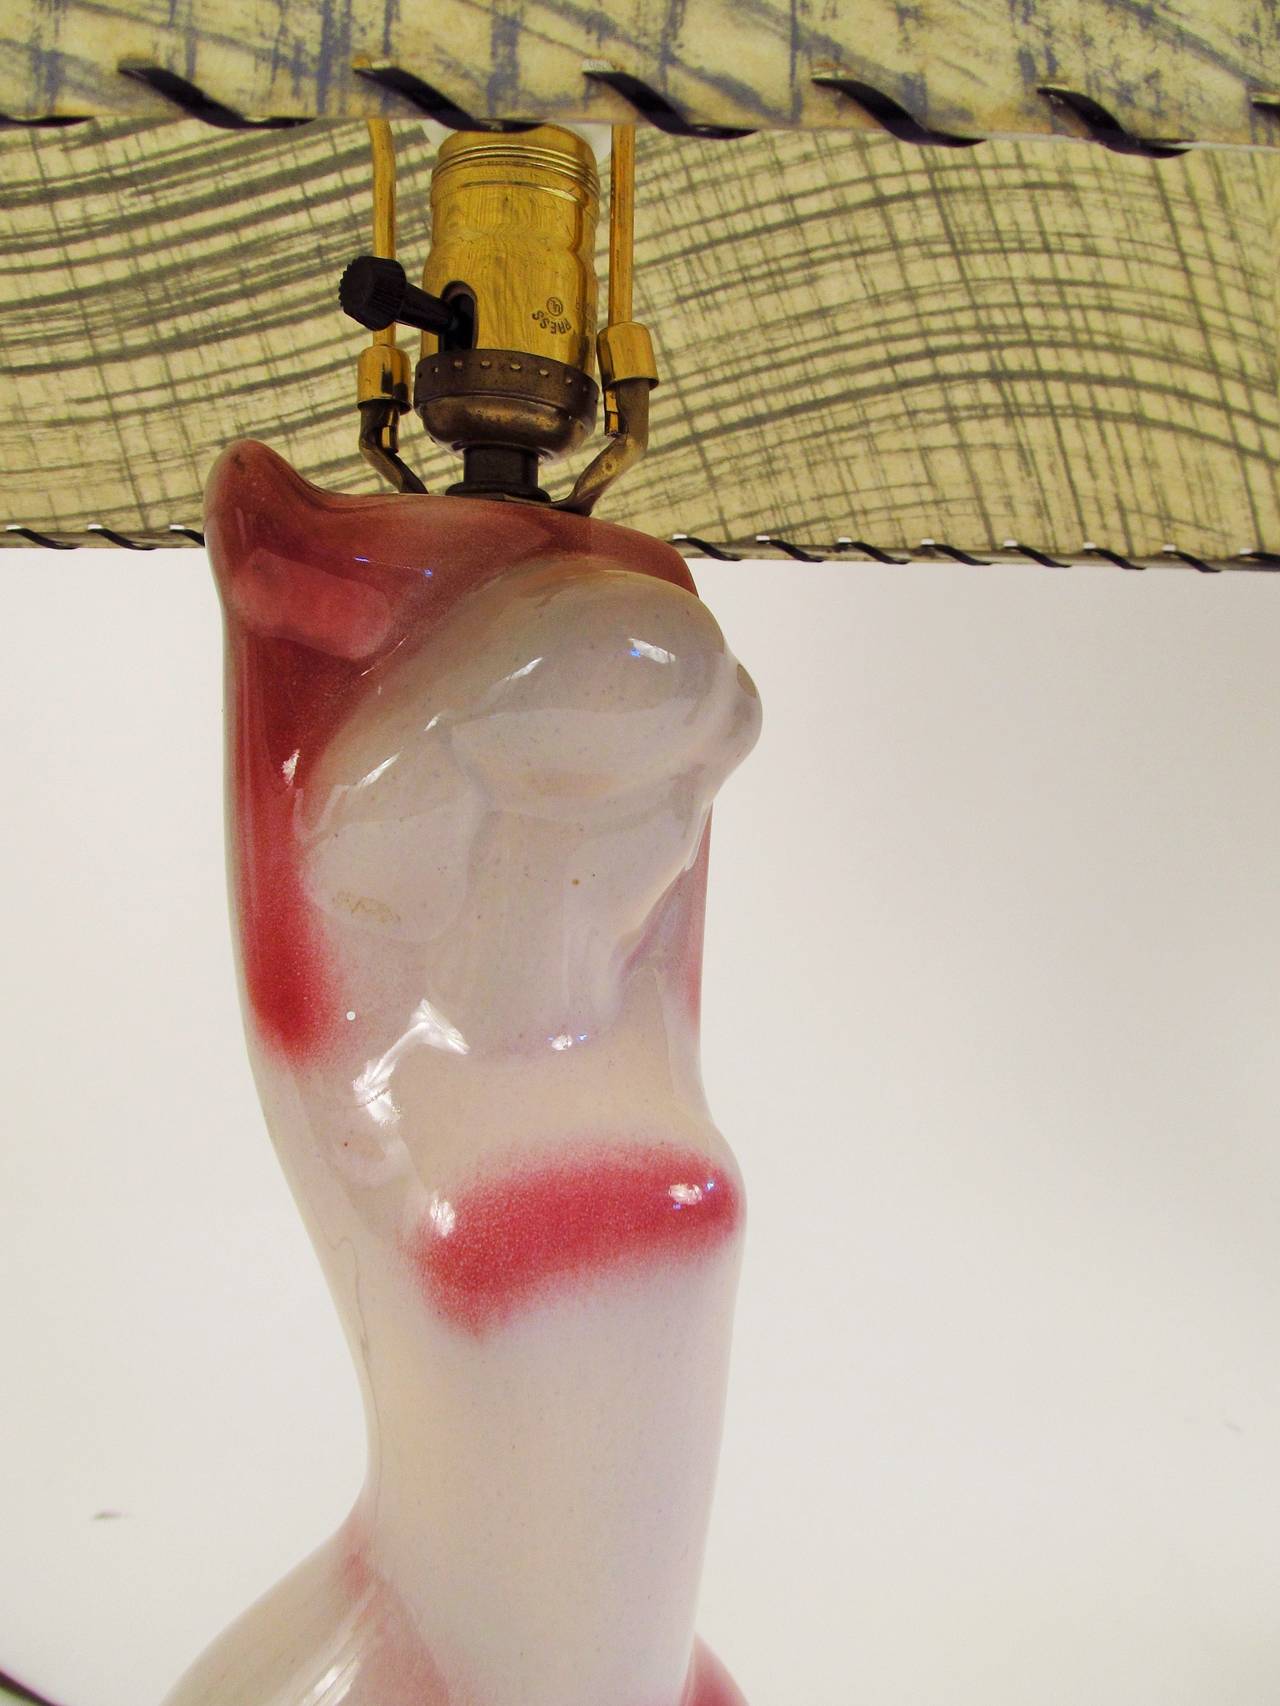 This lovely stylized female figure is attributed to The Heifetz Lamp Company, circa 1950s. The glaze is a soft oyster grey with a sort of raspberry pink accents. The shade is a period fiberglass rectangular shade in beige with grey brushstrokes.